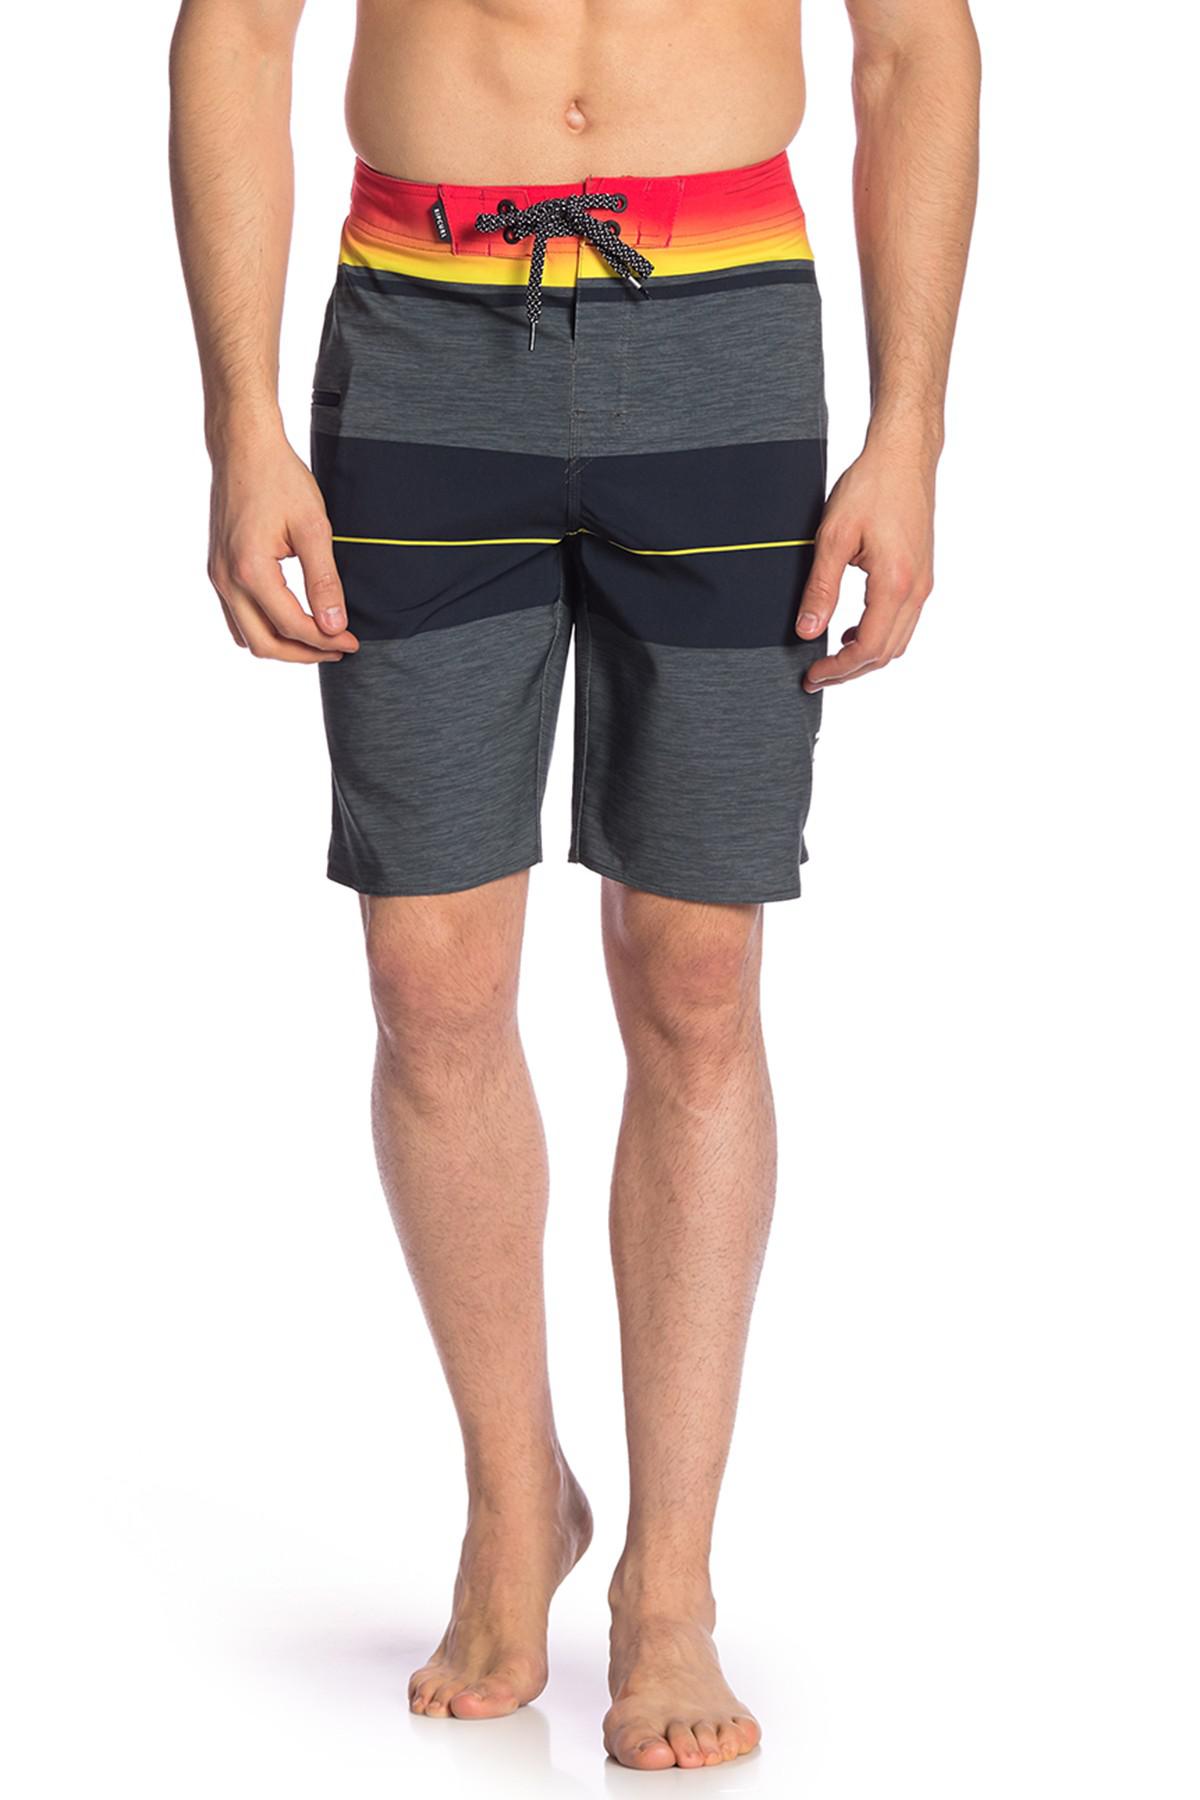 Rip Curl Mirage Eclipse Board Shorts in Black for Men - Lyst